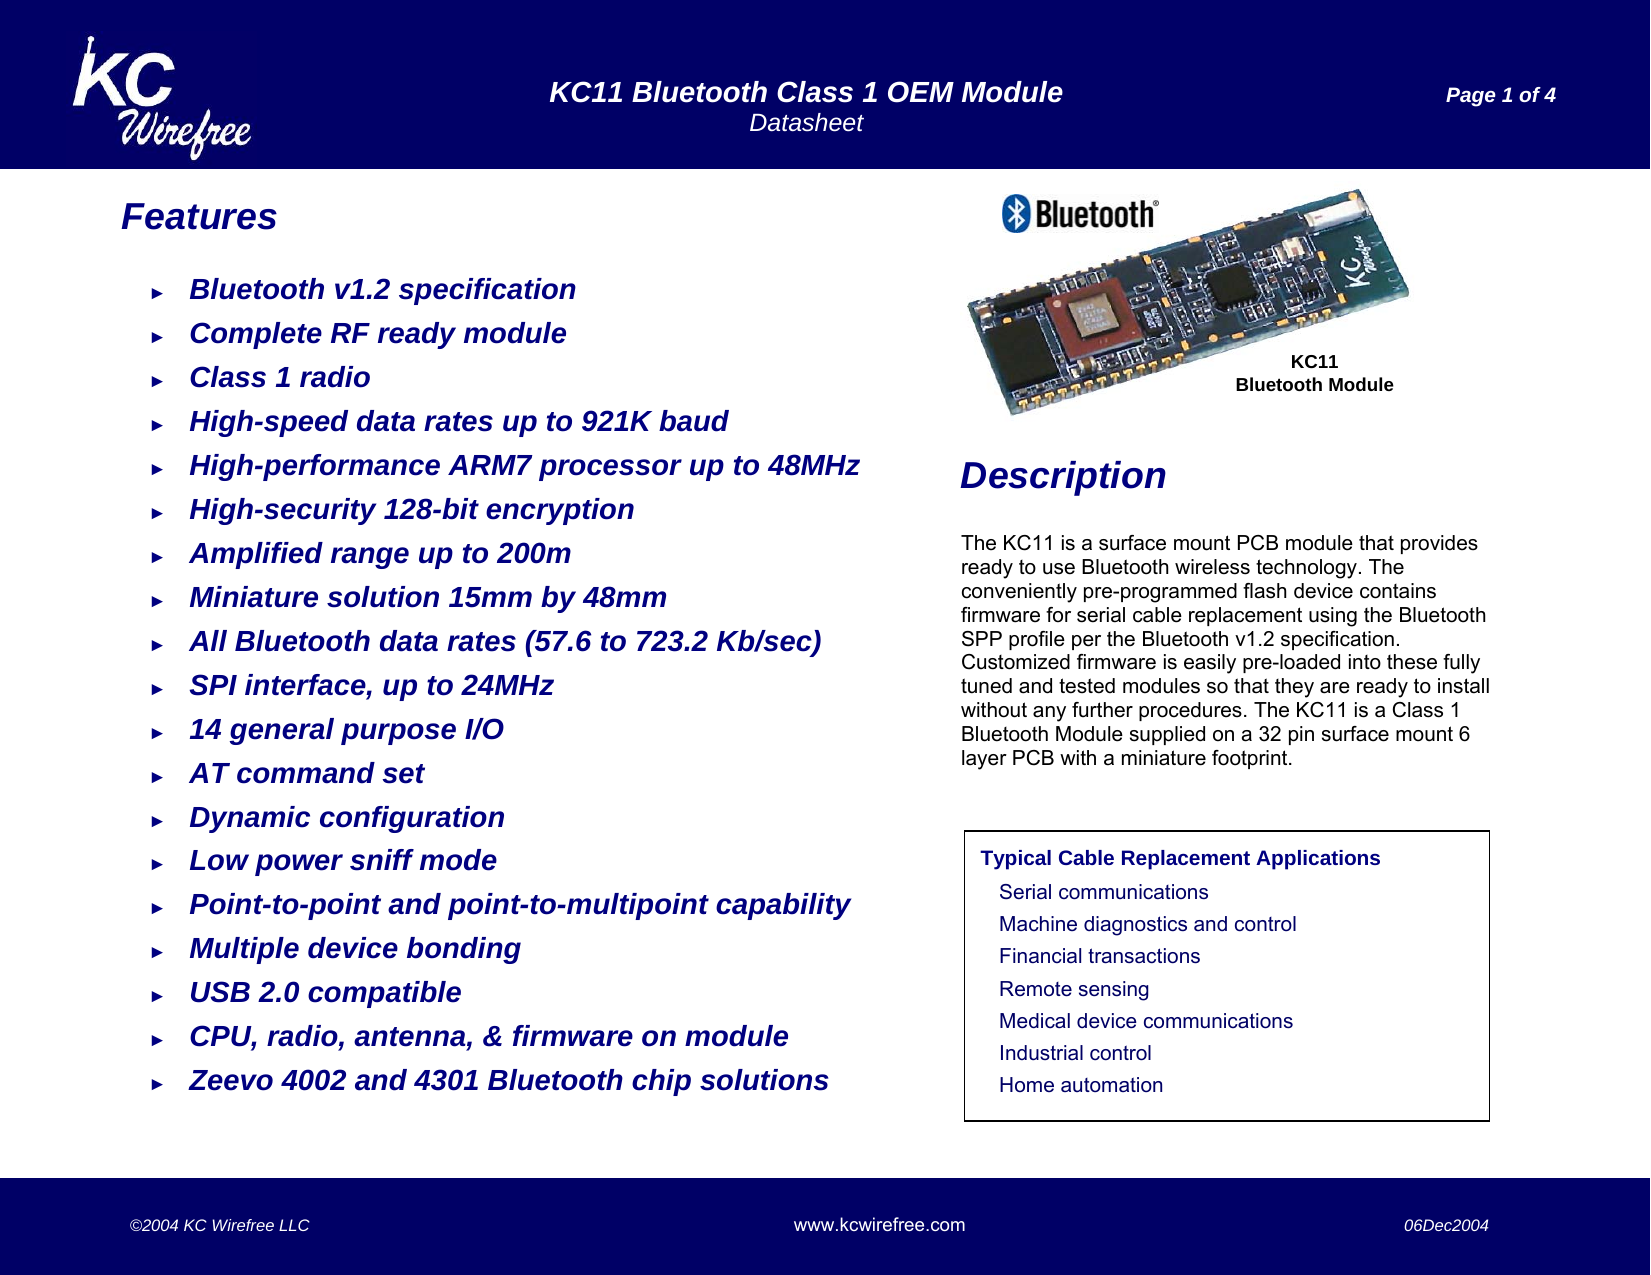   KC11 Bluetooth Class 1 OEM Module  Page 1 of 4  Datasheet    ©2004 KC Wirefree LLC www.kcwirefree.com  06Dec2004   Features  ► Bluetooth v1.2 specification ► Complete RF ready module ► Class 1 radio ► High-speed data rates up to 921K baud ► High-performance ARM7 processor up to 48MHz ► High-security 128-bit encryption ► Amplified range up to 200m ► Miniature solution 15mm by 48mm  ► All Bluetooth data rates (57.6 to 723.2 Kb/sec) ► SPI interface, up to 24MHz ► 14 general purpose I/O ► AT command set ► Dynamic configuration ► Low power sniff mode ► Point-to-point and point-to-multipoint capability ► Multiple device bonding  ► USB 2.0 compatible ► CPU, radio, antenna, &amp; firmware on module ► Zeevo 4002 and 4301 Bluetooth chip solutions   Description  The KC11 is a surface mount PCB module that provides ready to use Bluetooth wireless technology. The conveniently pre-programmed flash device contains firmware for serial cable replacement using the Bluetooth SPP profile per the Bluetooth v1.2 specification. Customized firmware is easily pre-loaded into these fully tuned and tested modules so that they are ready to install without any further procedures. The KC11 is a Class 1 Bluetooth Module supplied on a 32 pin surface mount 6 layer PCB with a miniature footprint.        KC11Bluetooth Module Typical Cable Replacement Applications  Serial communications Machine diagnostics and control Financial transactions Remote sensing Medical device communications Industrial control Home automation 